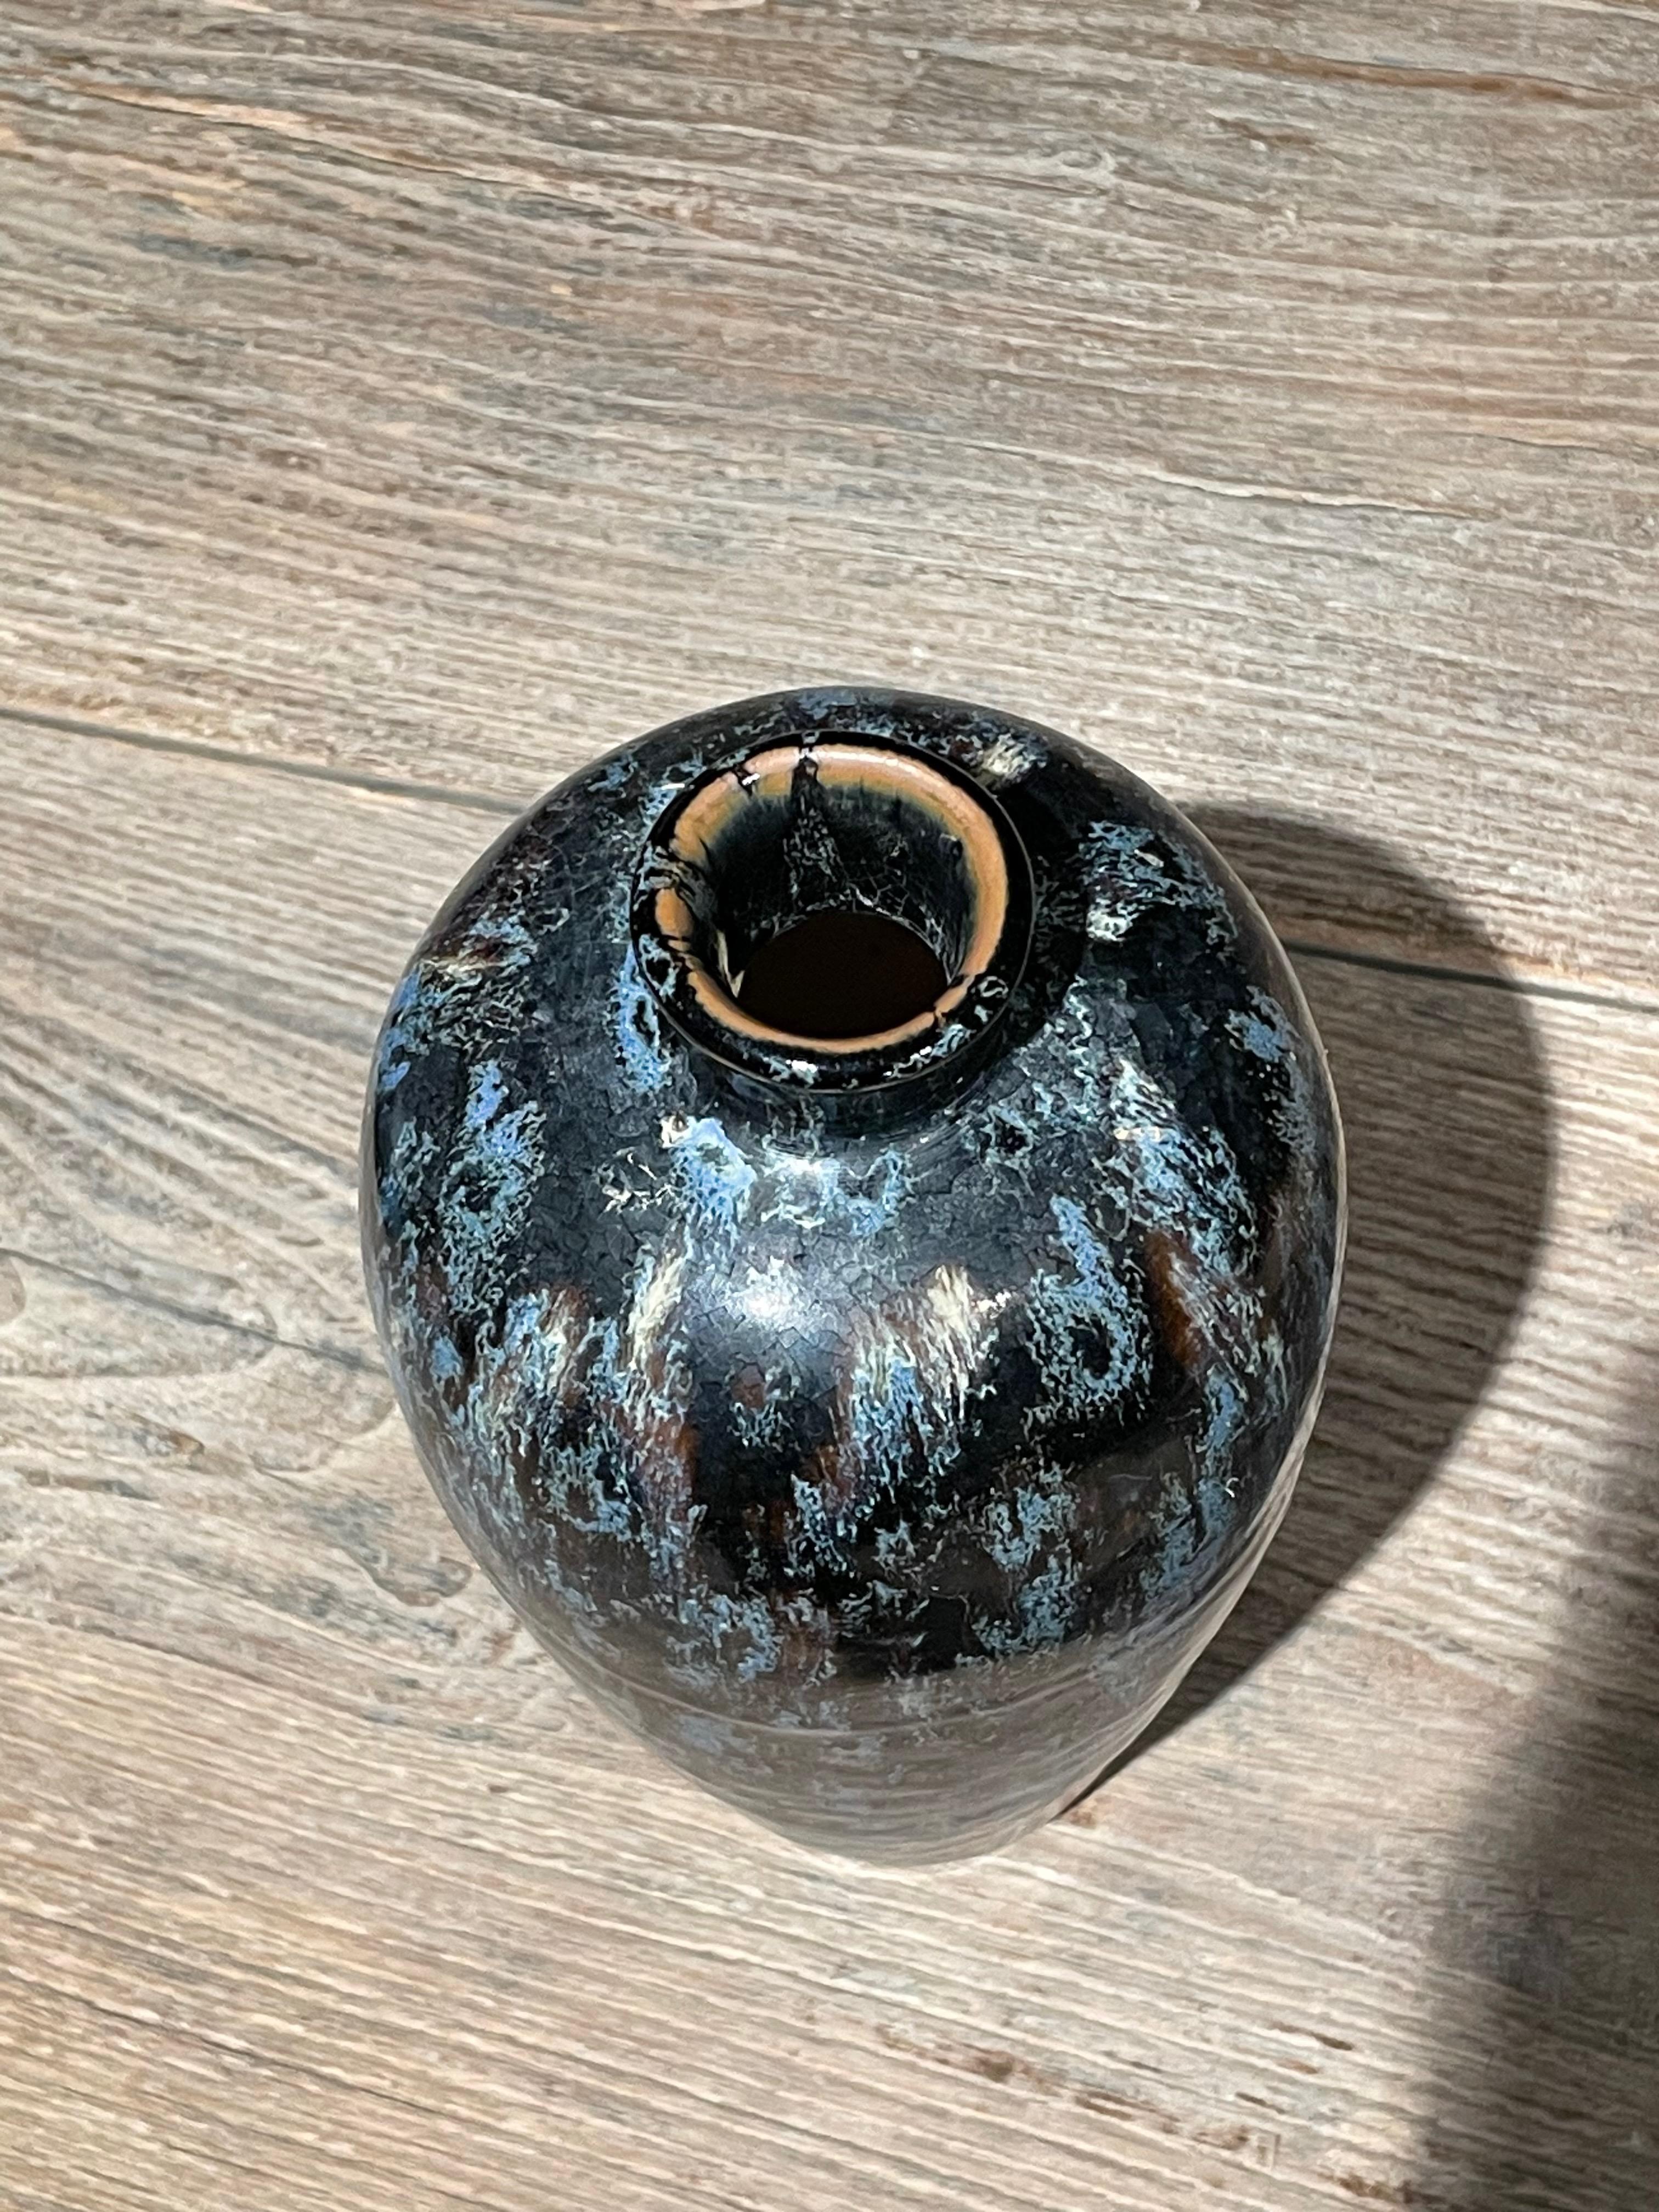 Contemporary Chinese thin spout vase with black, blue and white splatter glaze.
One of several from collection of similar glaze in various shapes.
